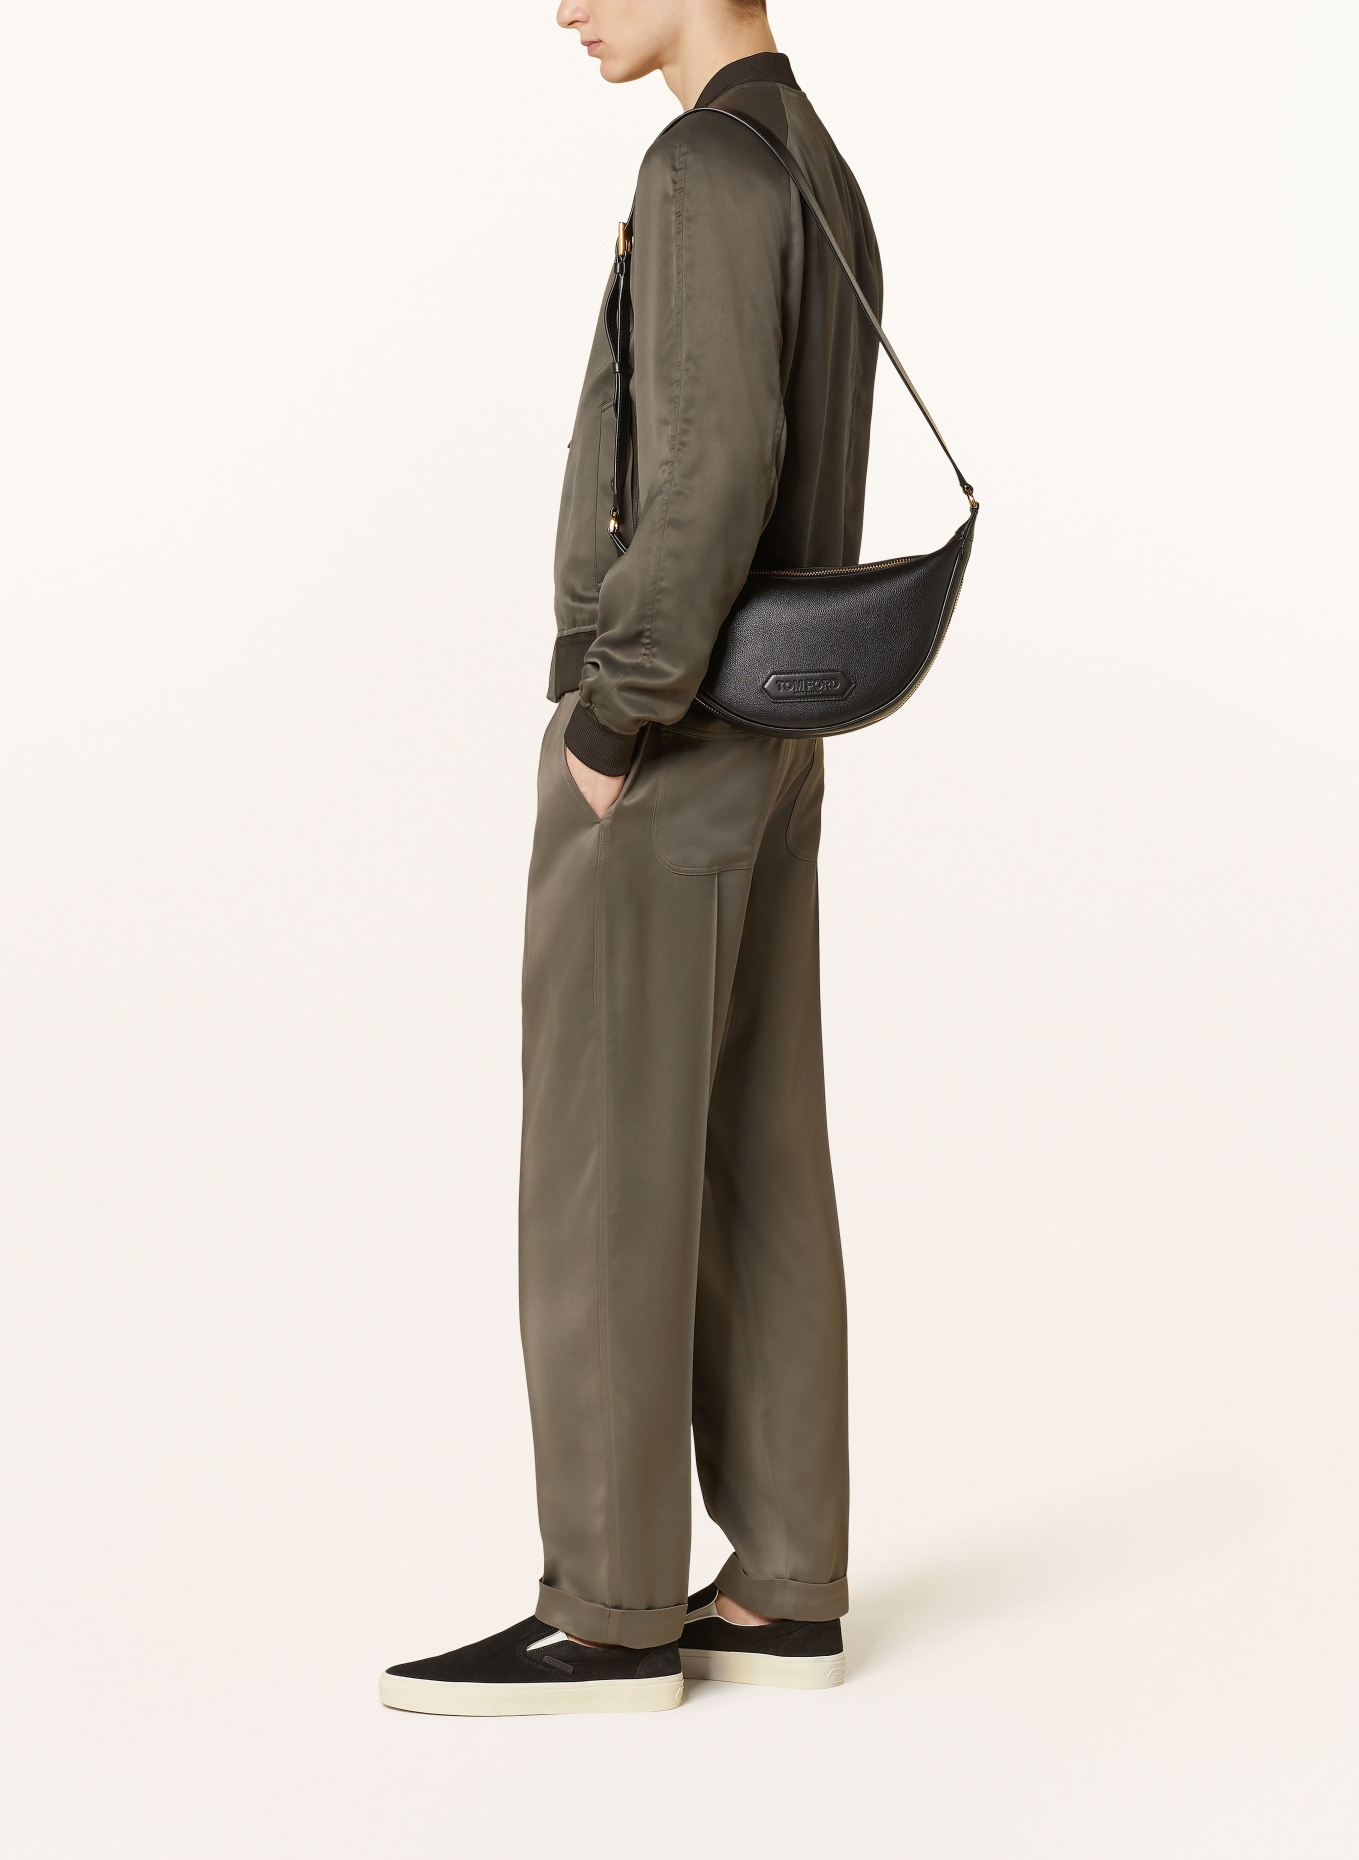 TOM FORD Pants in jogger style slim fit, Color: KHAKI (Image 4)